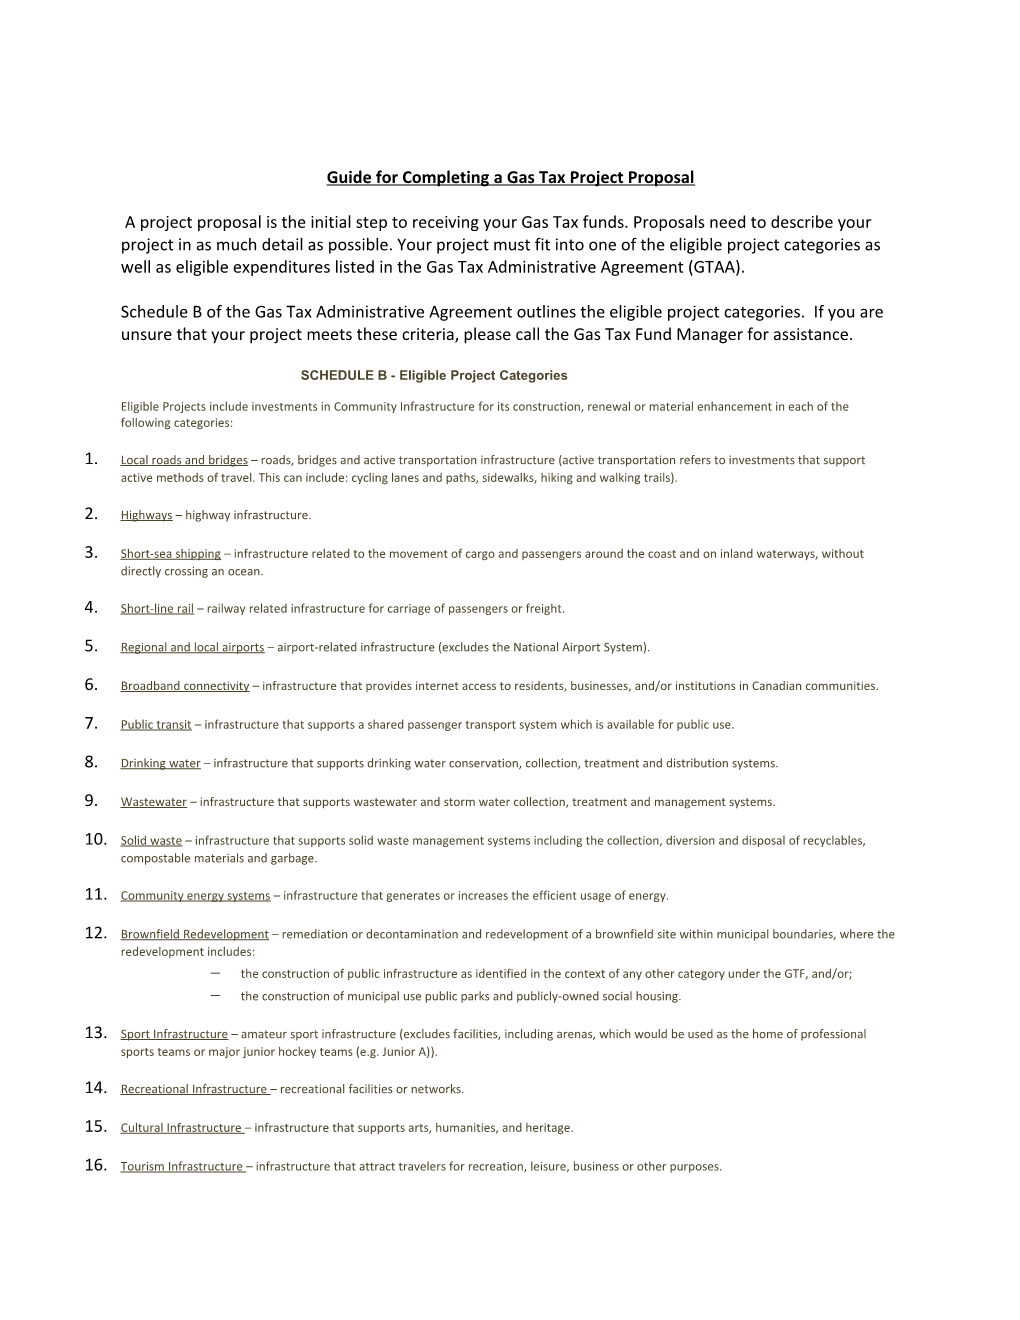 Guidefor Completing a Gas Tax Project Proposal